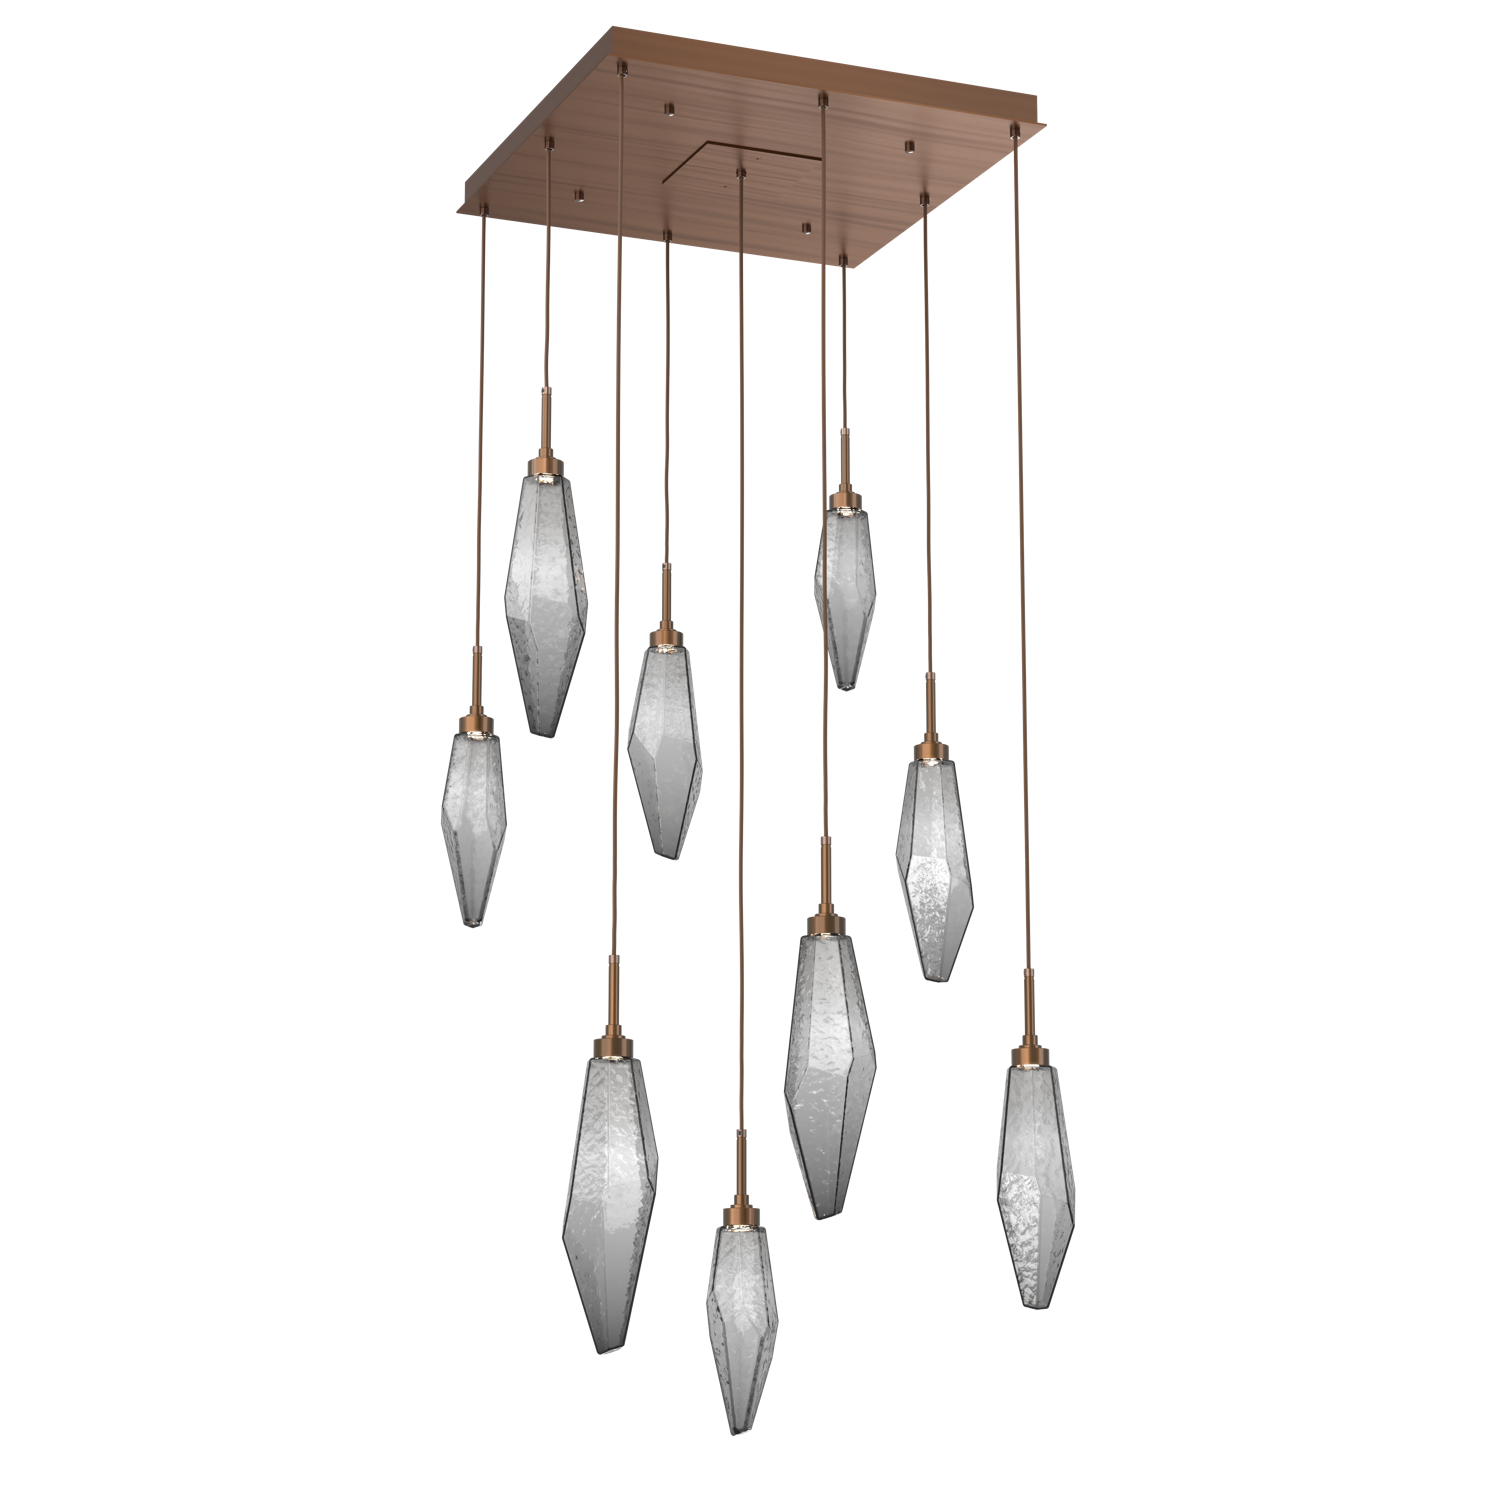 CHB0050-09-RB-CS-Hammerton-Studio-Rock-Crystal-9-light-square-pendant-chandelier-with-oil-rubbed-bronze-finish-and-chilled-smoke-glass-shades-and-LED-lamping